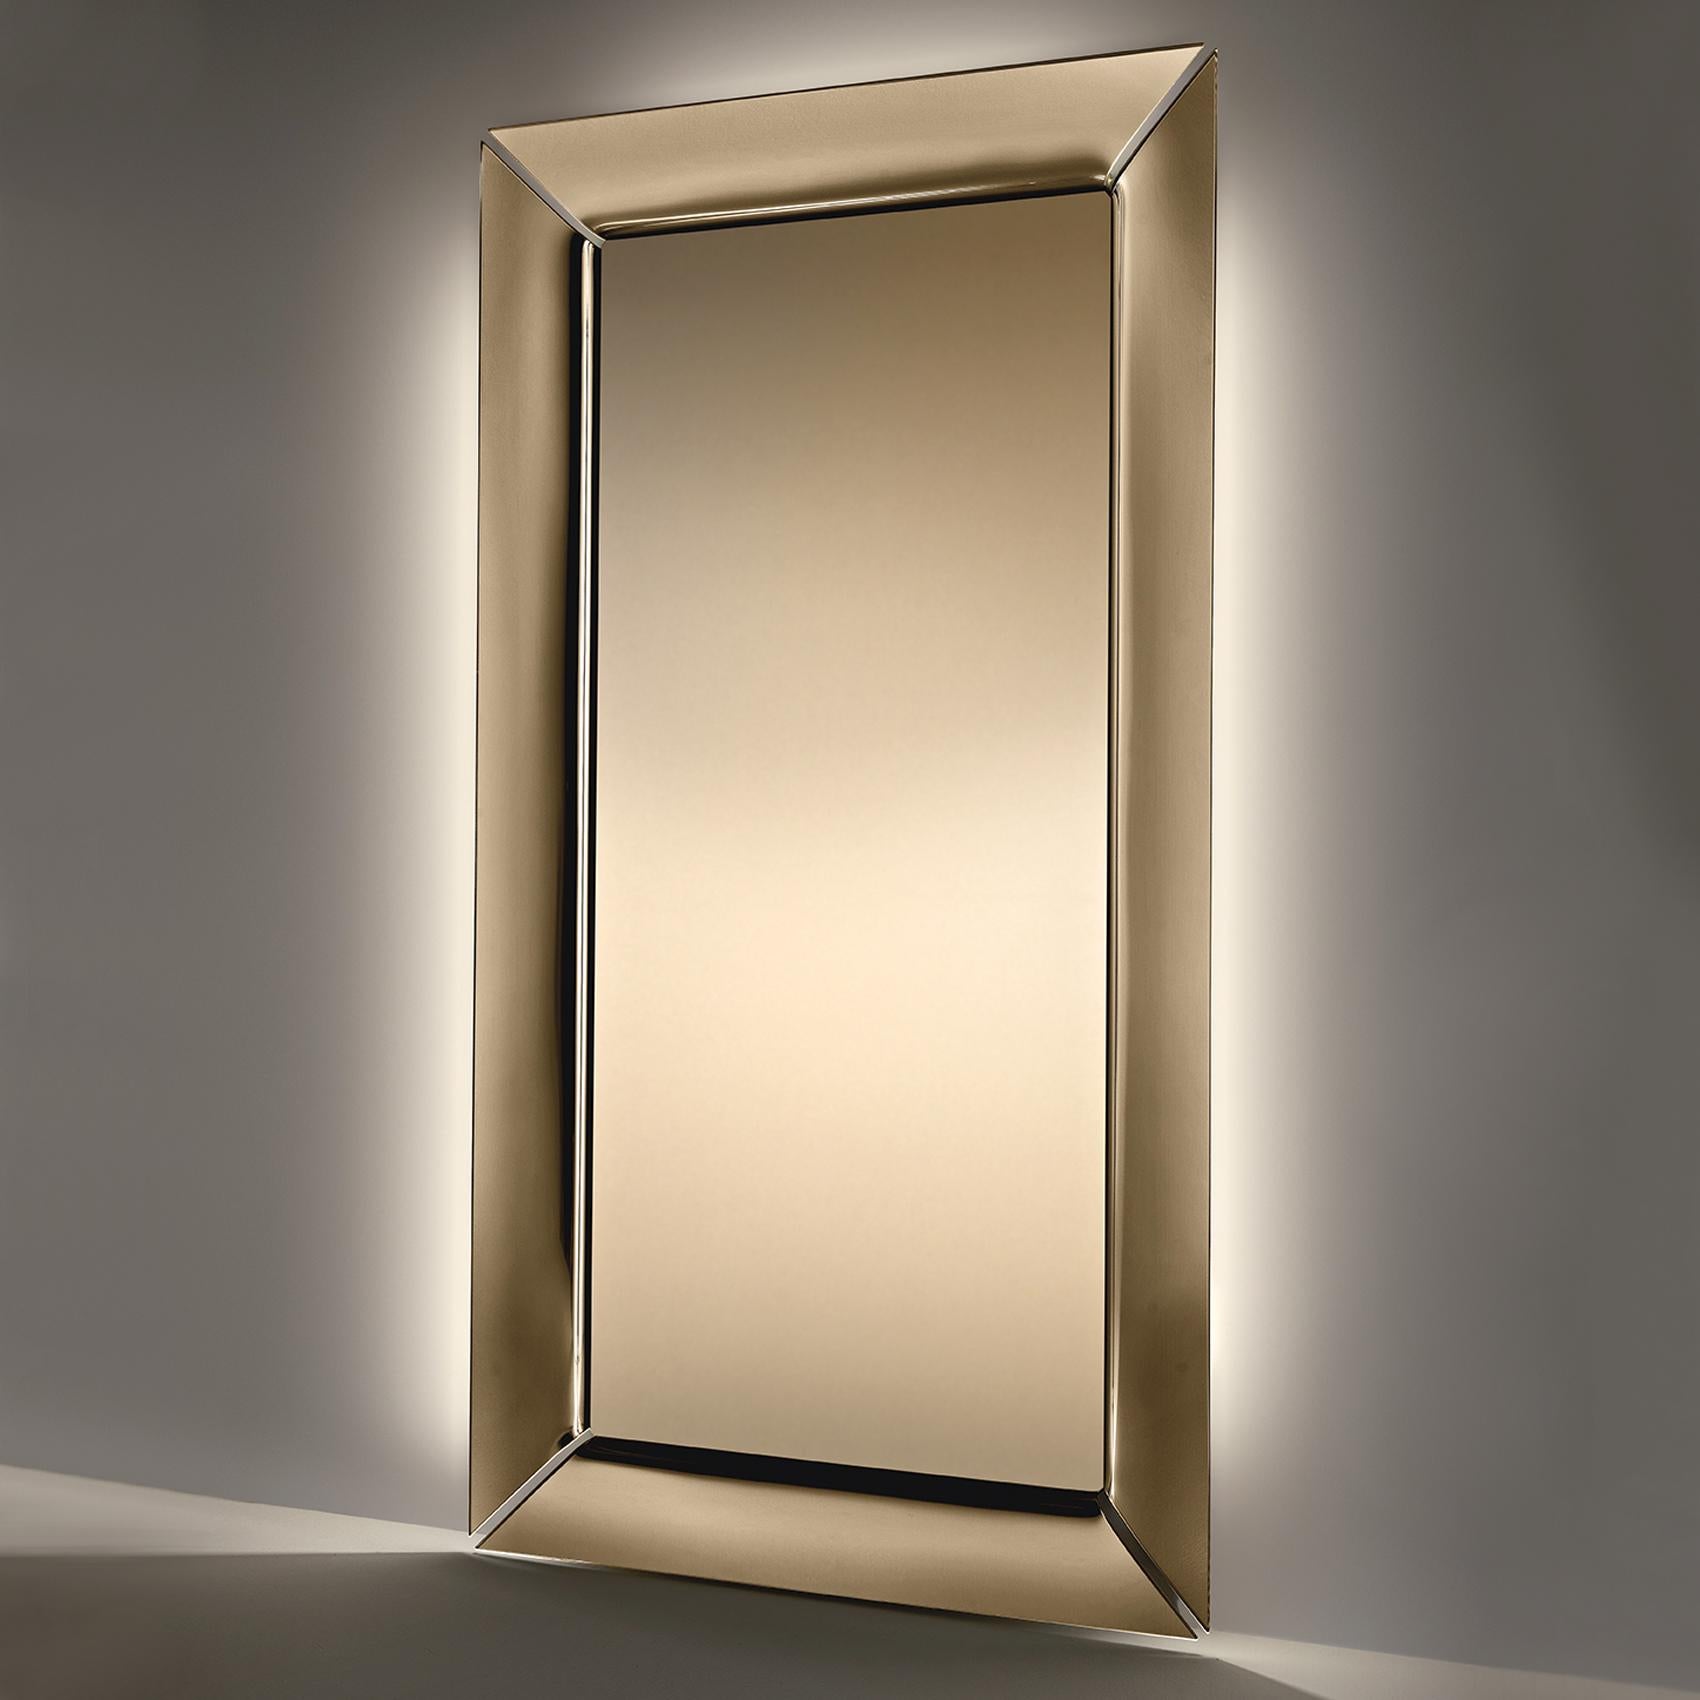 Mirror art frame bronze, floor or wall mirror
framed by 4 curved bronzed finish glass elements, 
6mm thick. With bronzed finish rectangular mirror glass.

 